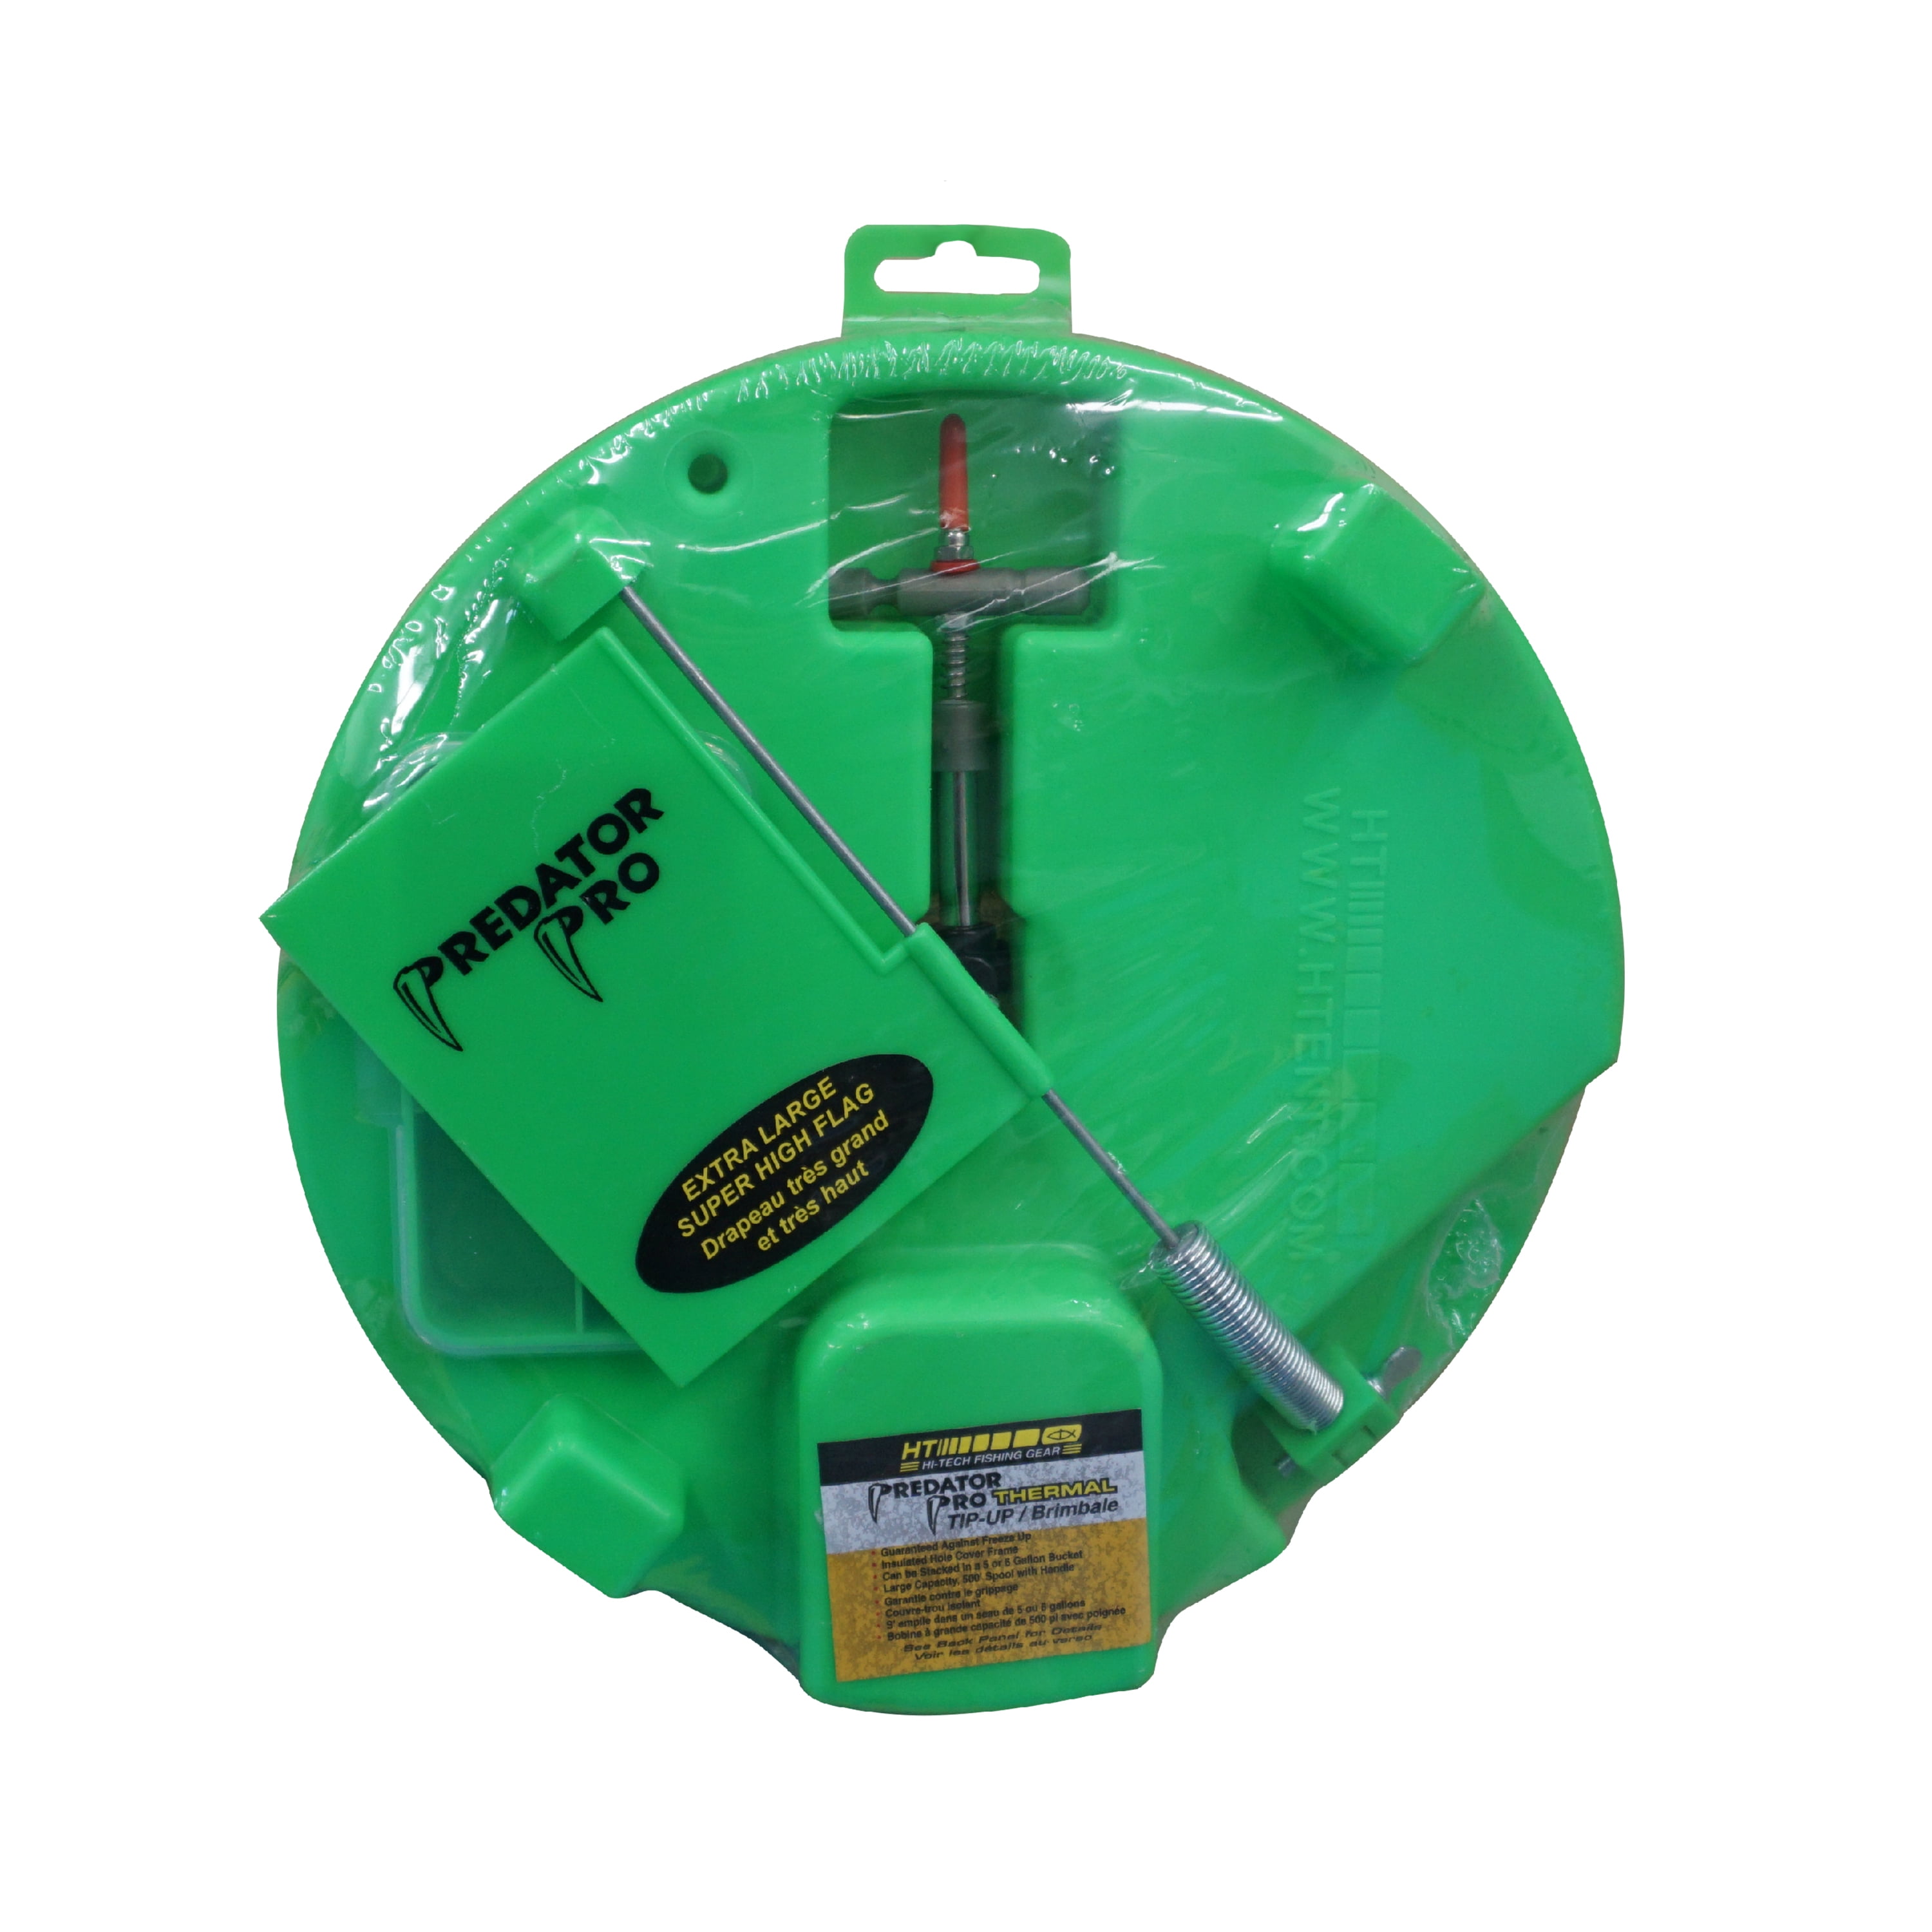 HT Enterprises Predator Pro Thermal Hole Cover Ice Fishing Tip-up